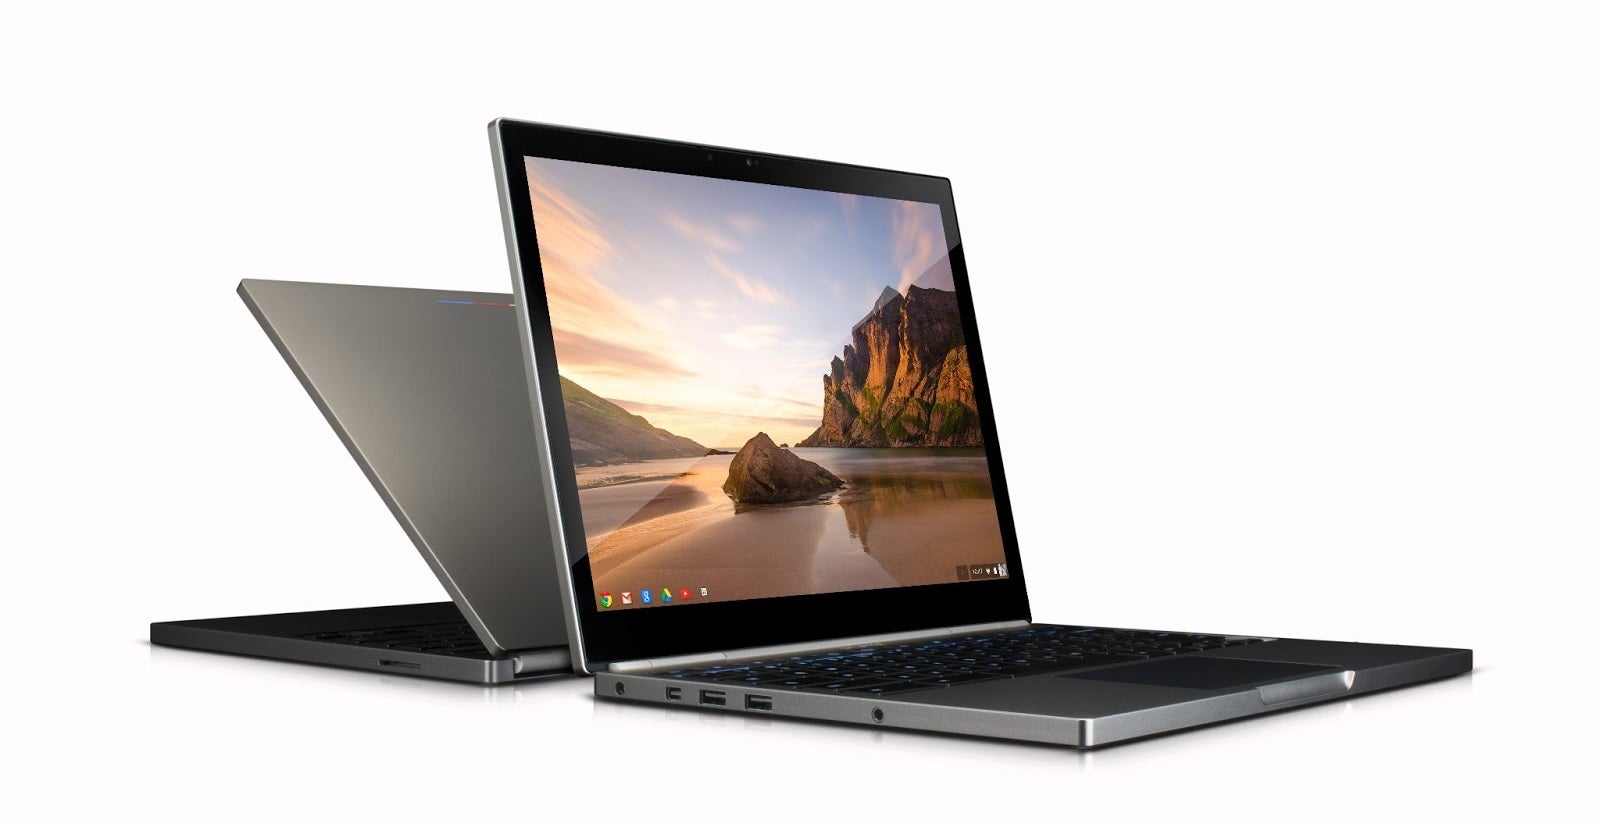 Indeed there will be a new Chromebook Pixel “coming out soon”